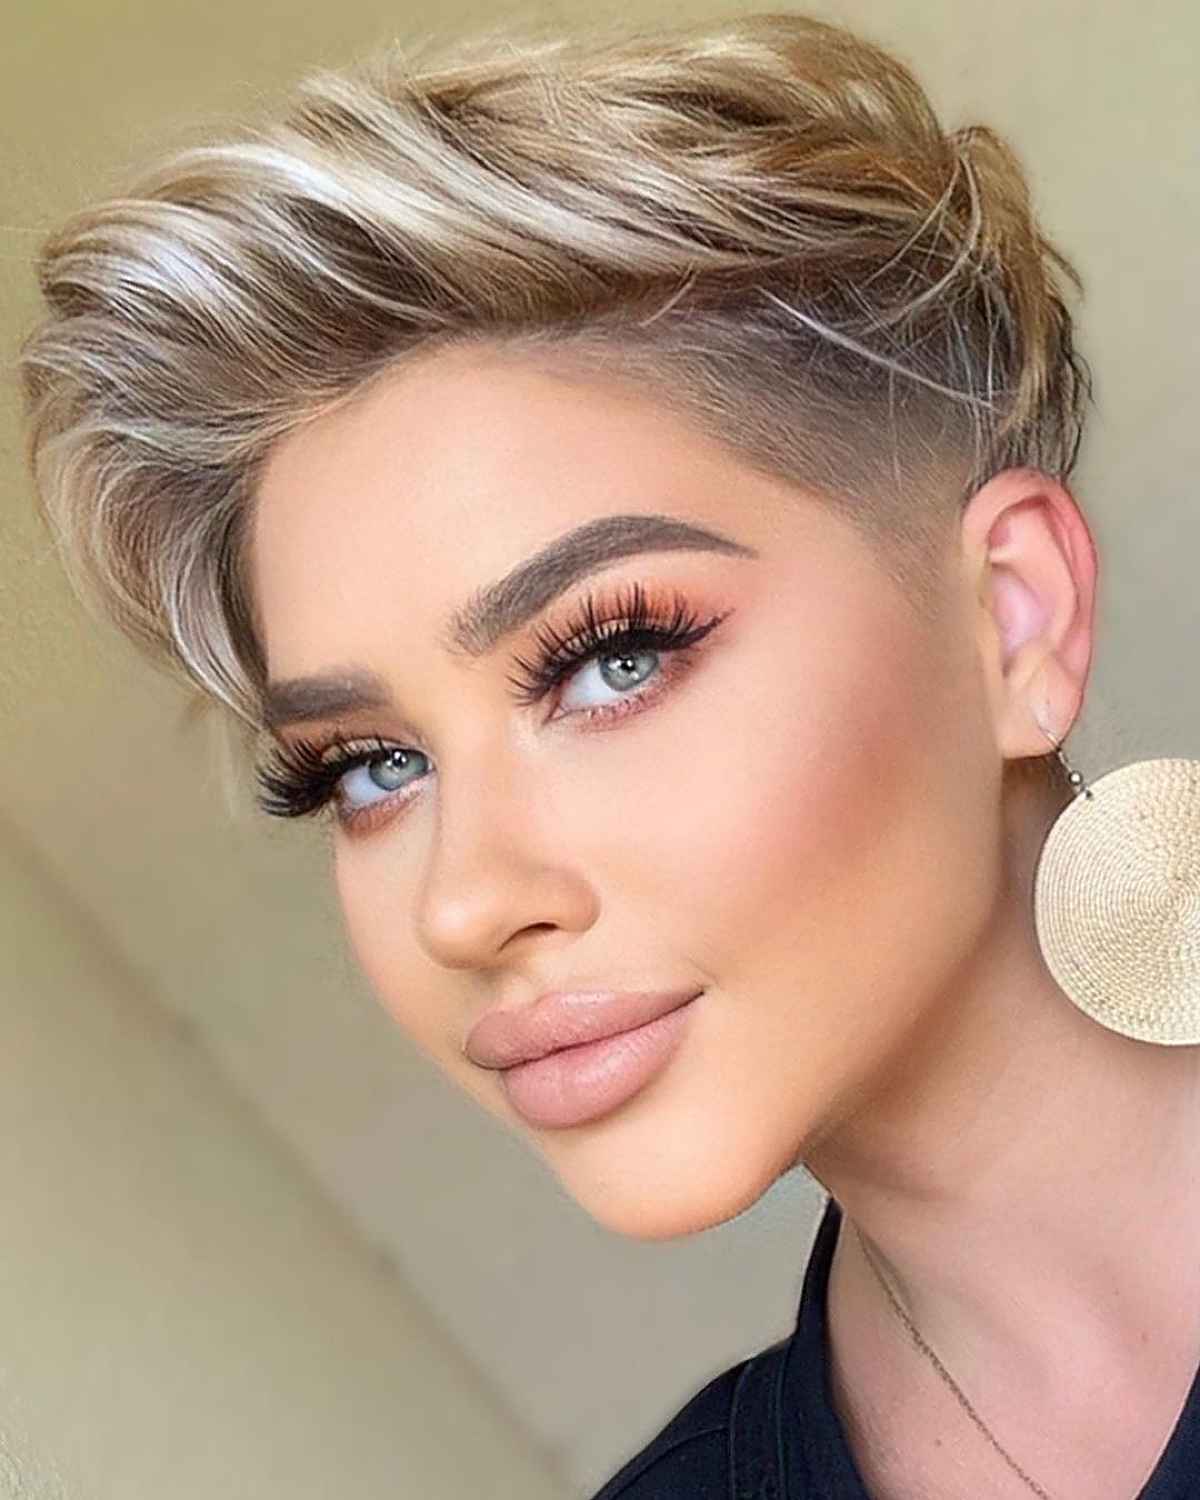 28 Low-Maintenance Short Haircuts for a Trendy, Yet Time-Saving Look